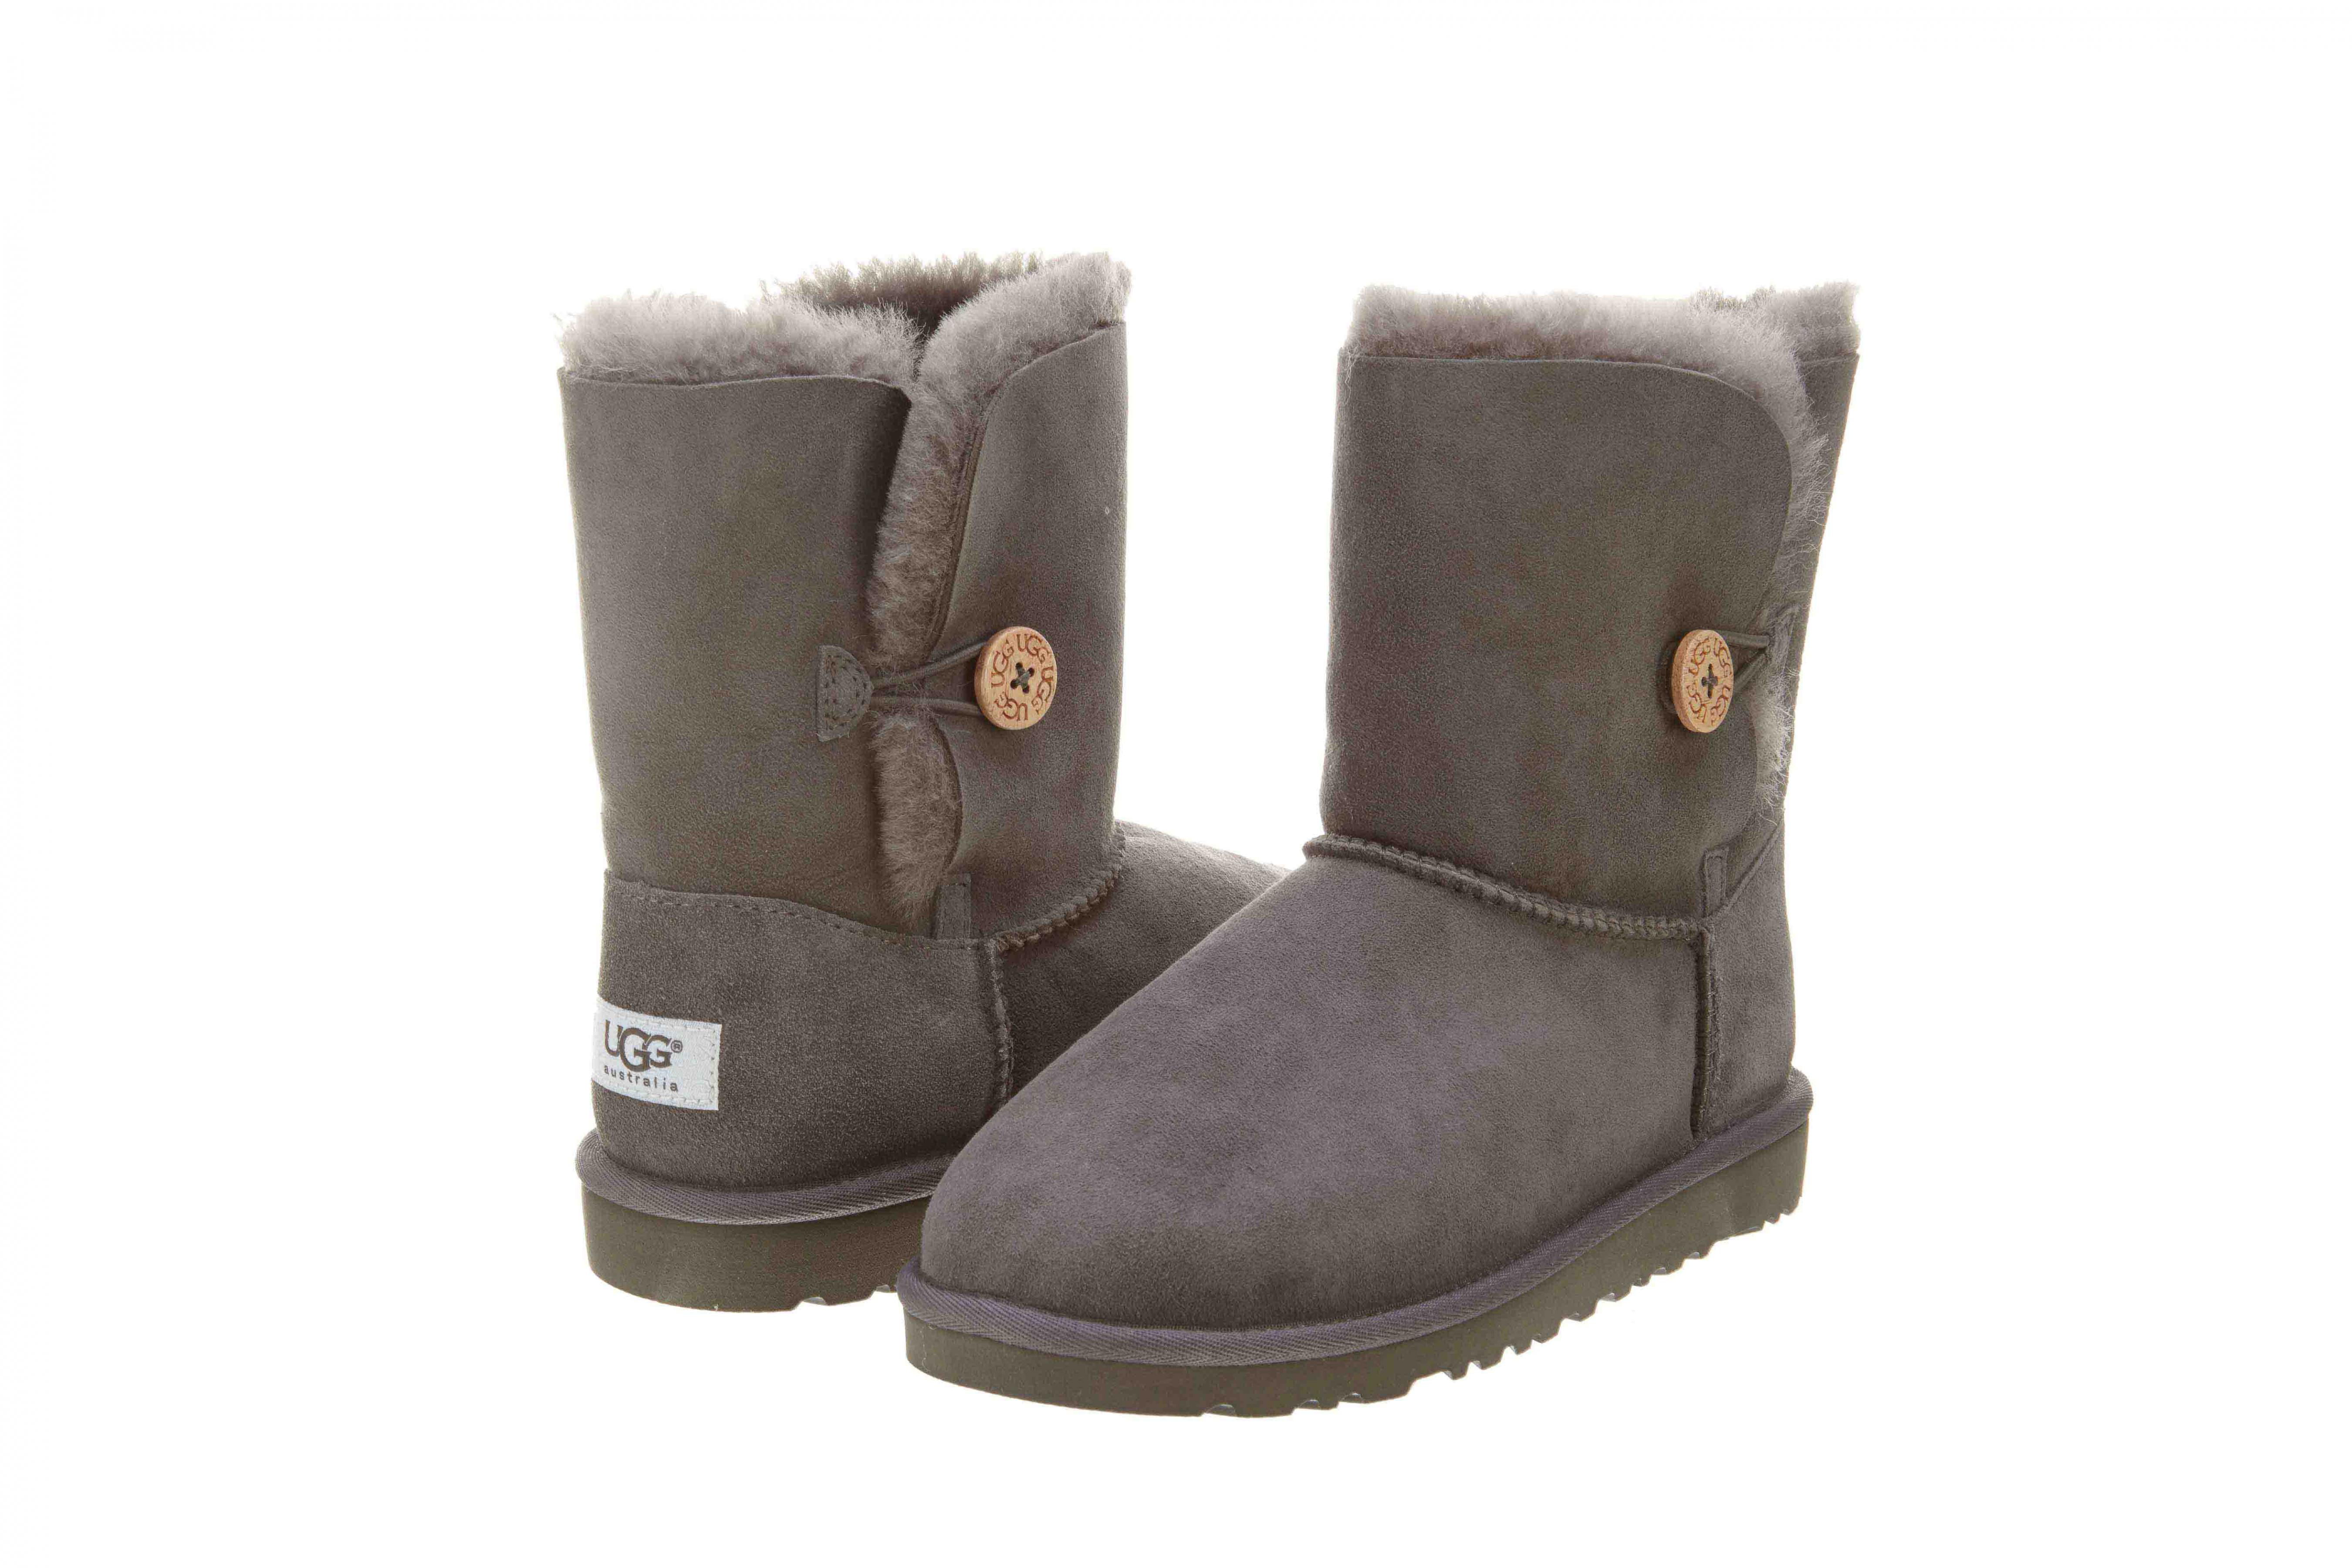 Bailey Button Boots Toddlers Style : 5991t - Walmart.com